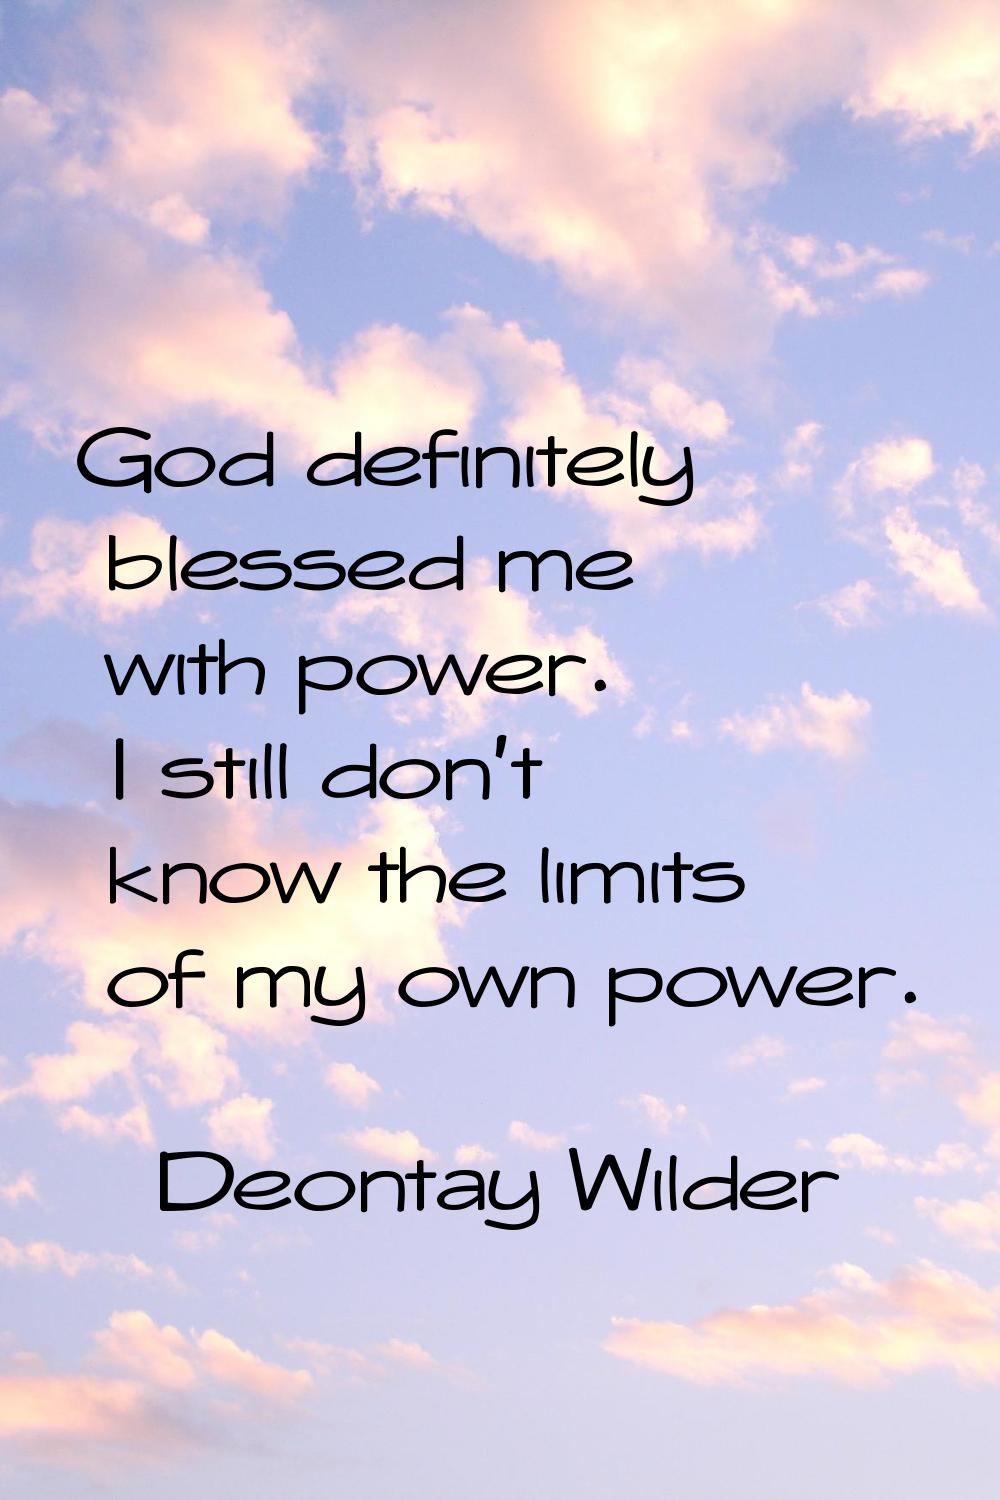 God definitely blessed me with power. I still don't know the limits of my own power.